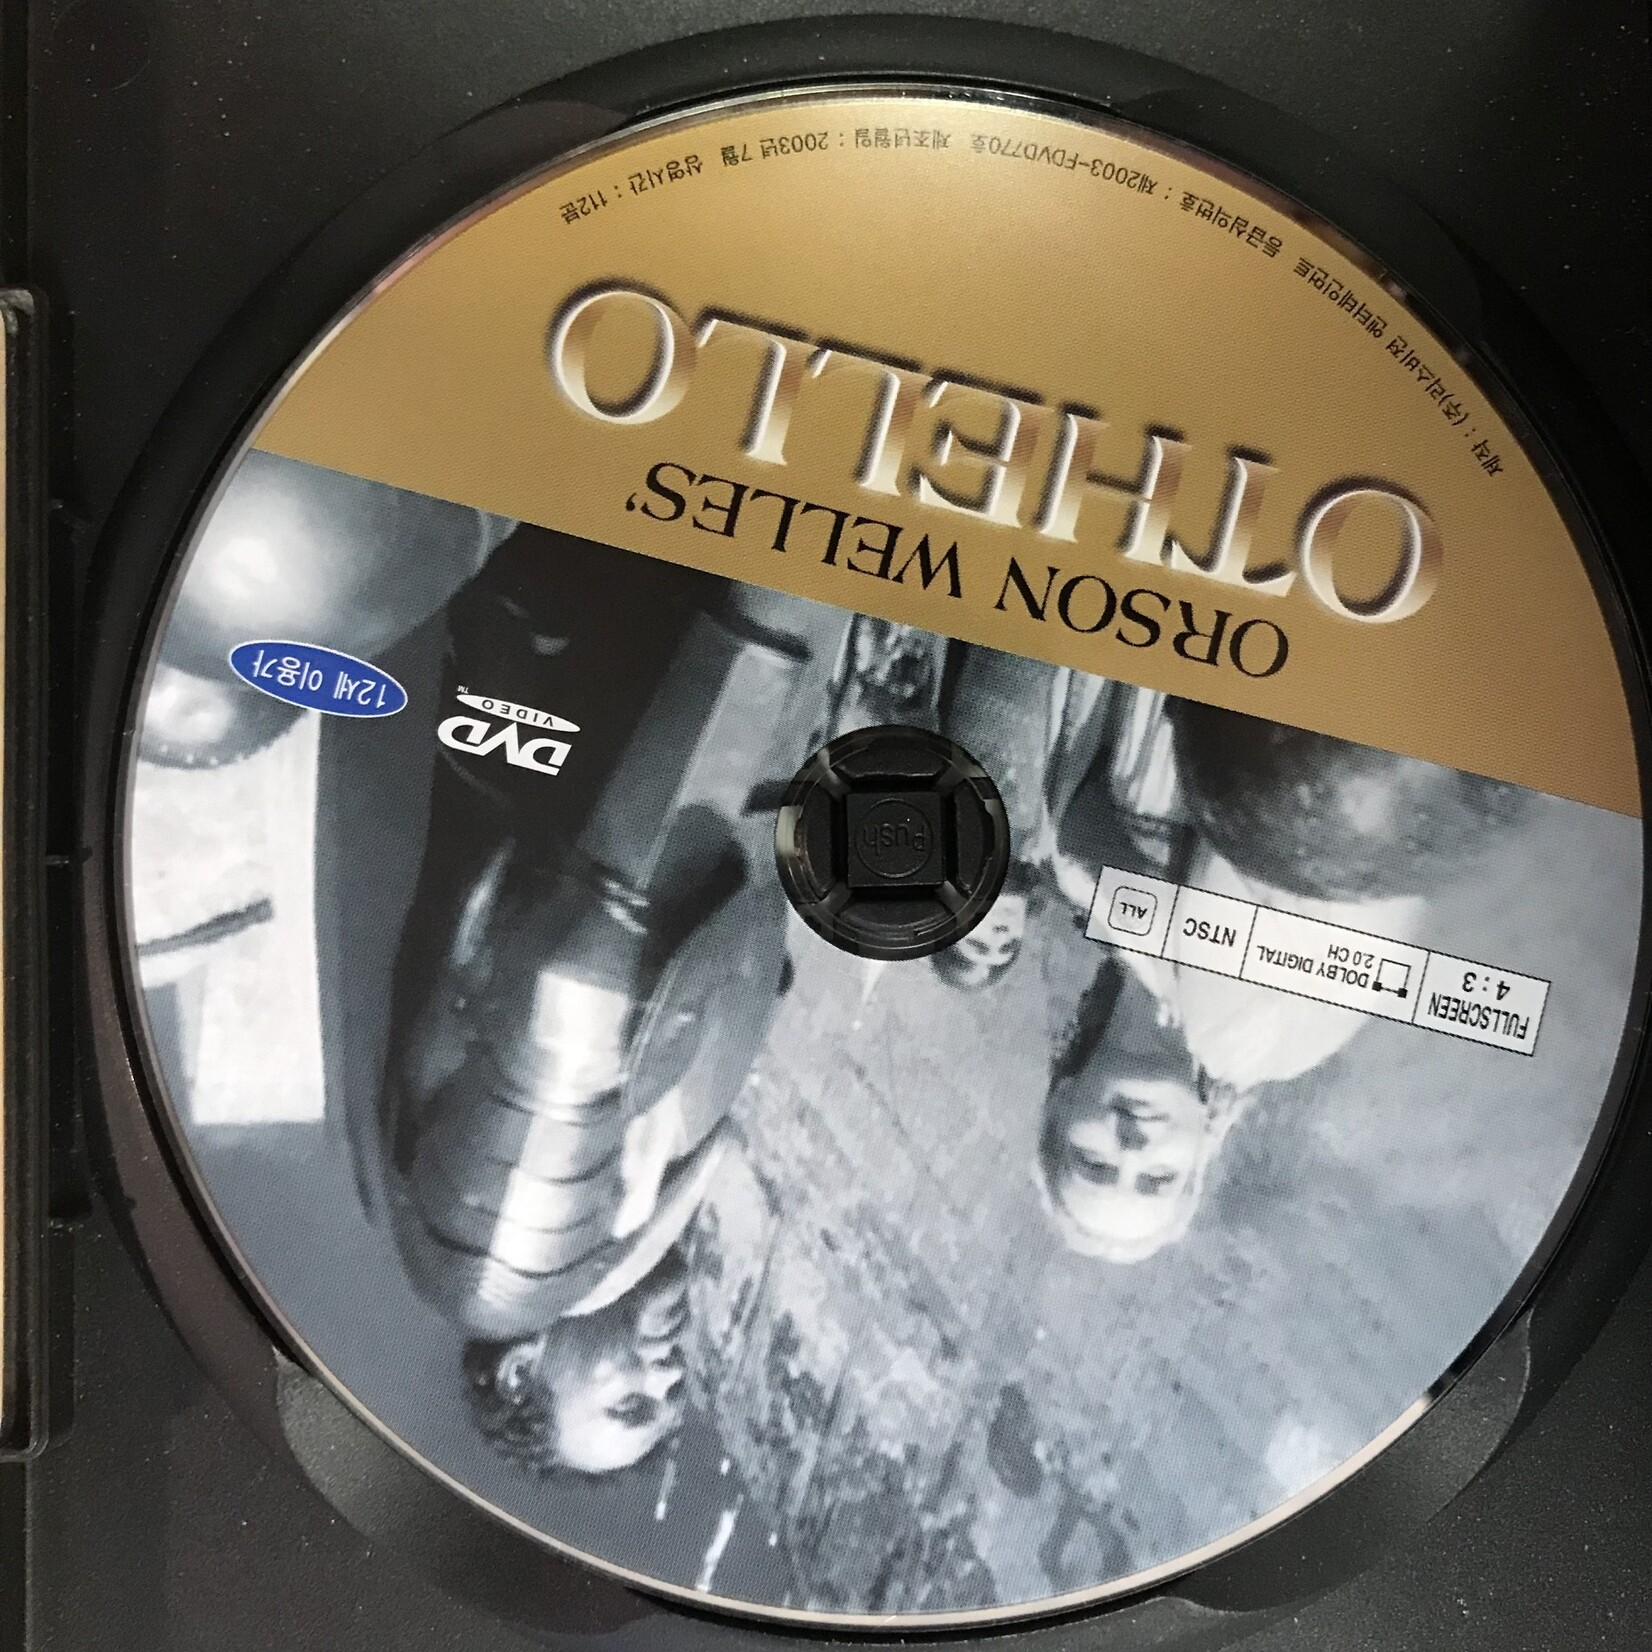 Orson Welles’ Othello - DVD (USED)